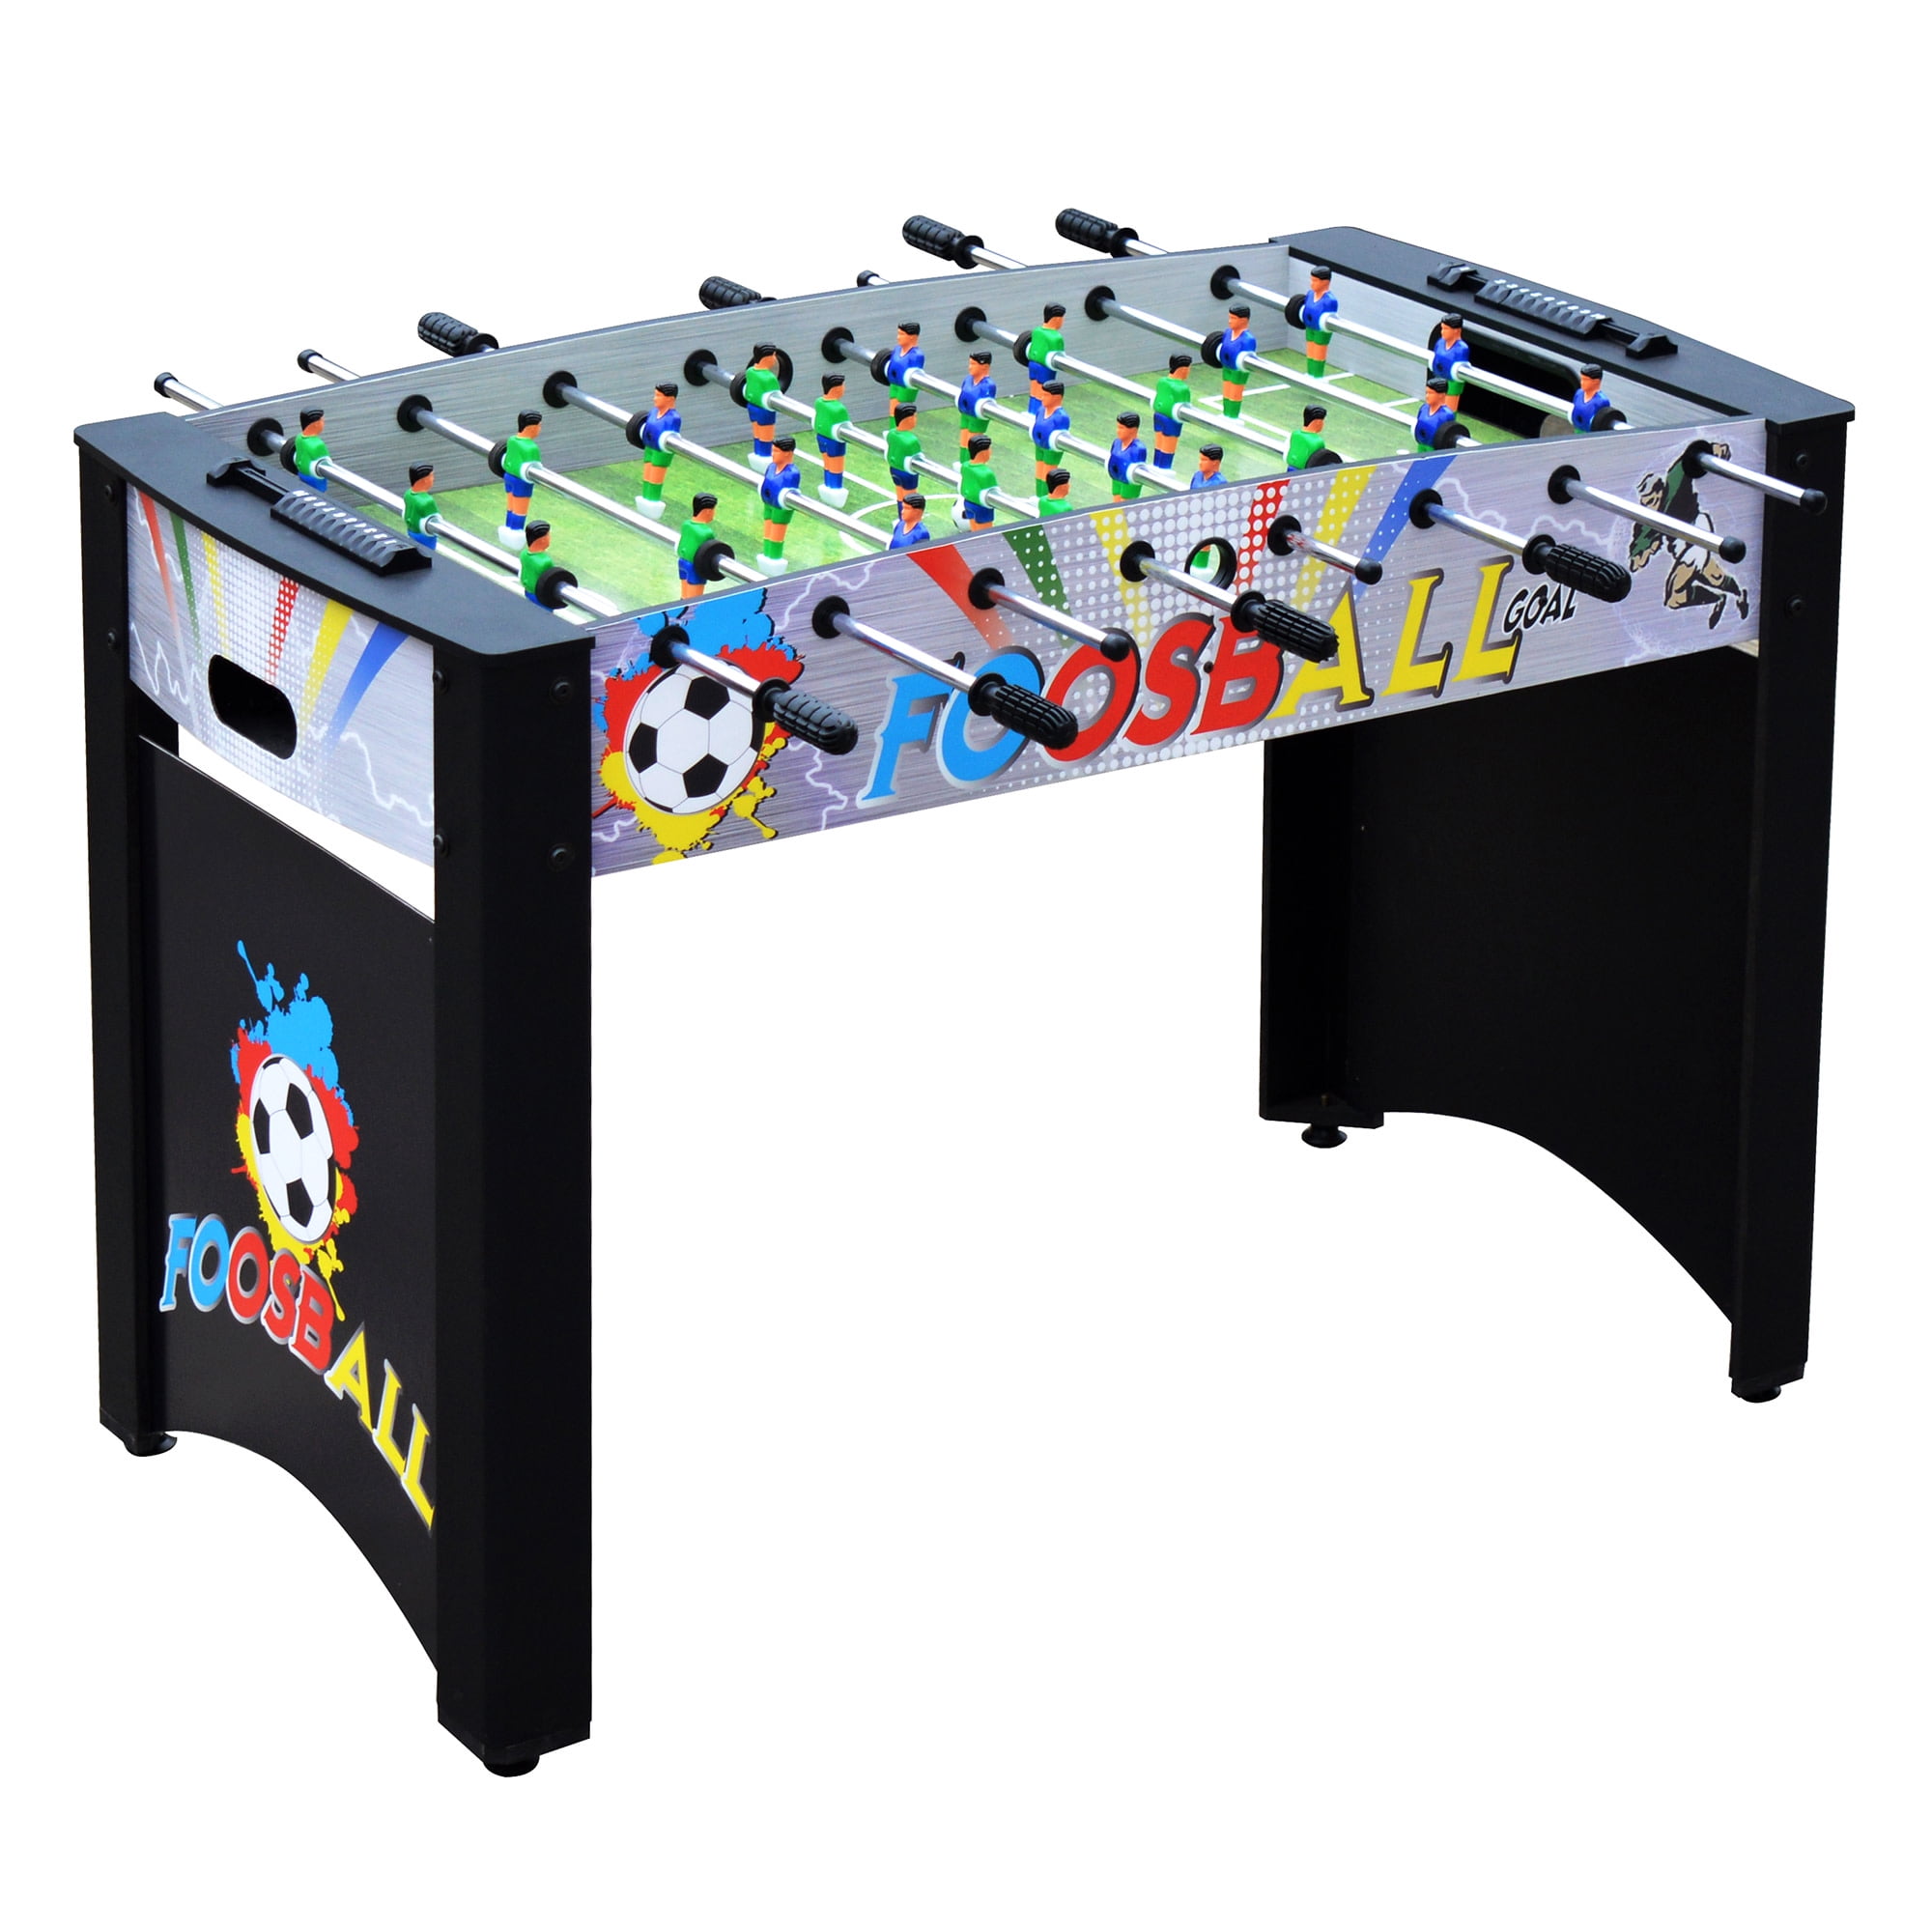 Details about   Playoff 4-Foot Foosball Table Soccer Game for Kids & Adults Ergonomic Handles 